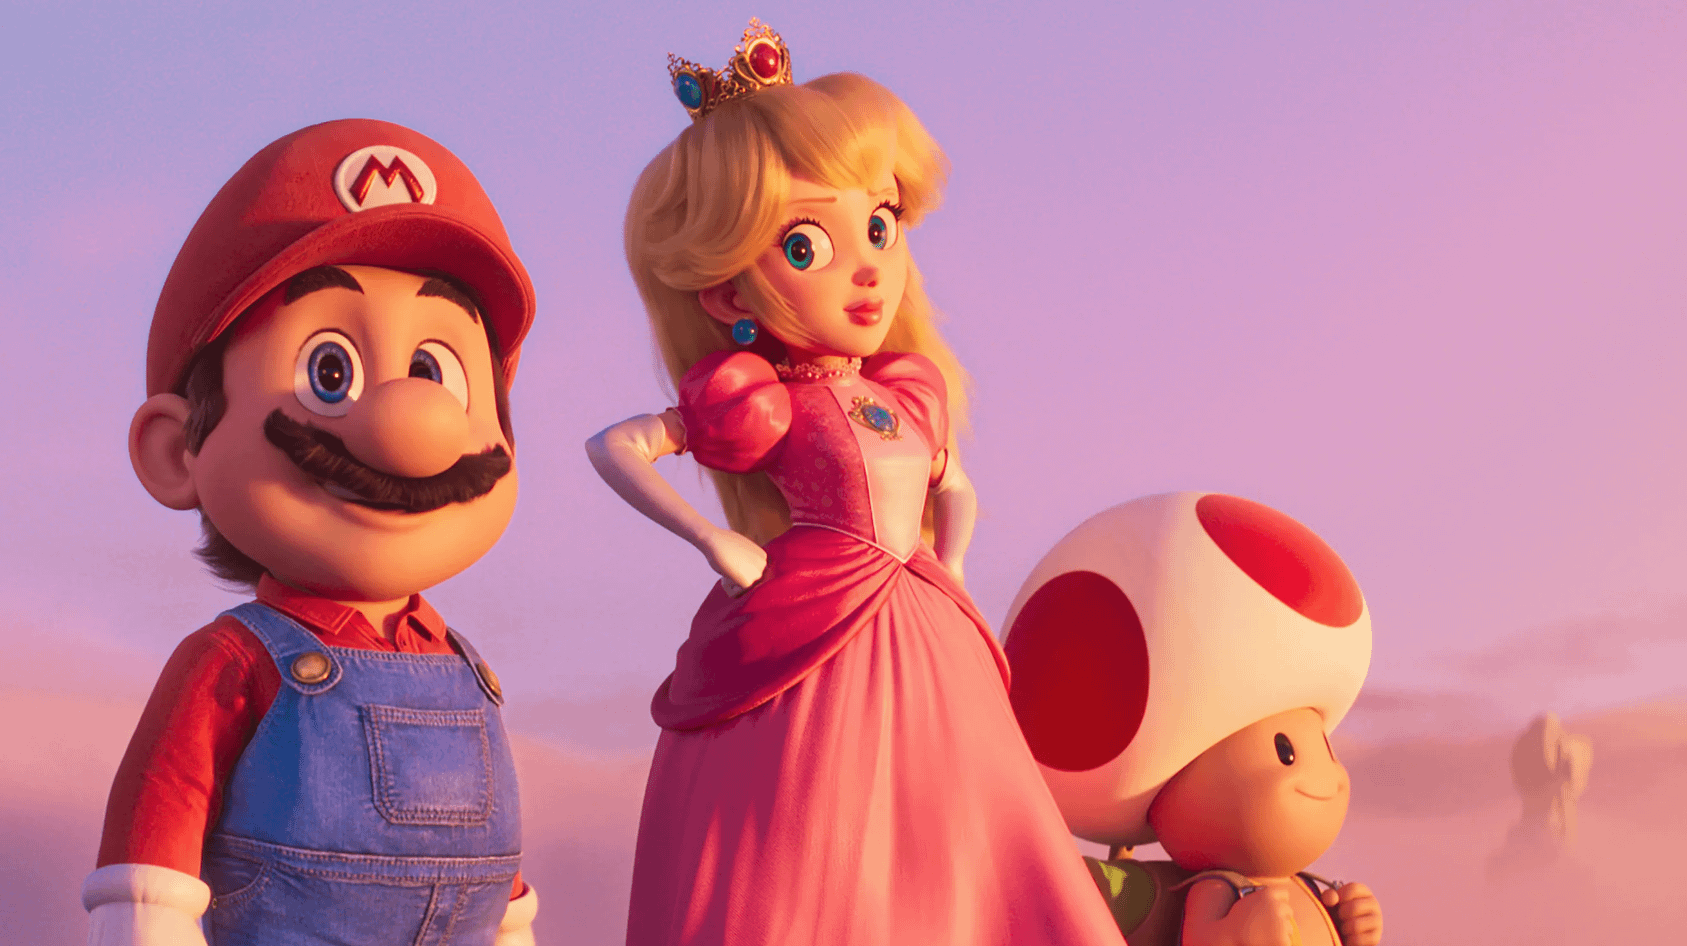 The pirated downloads of The Super Mario Bros. Movie contain malware